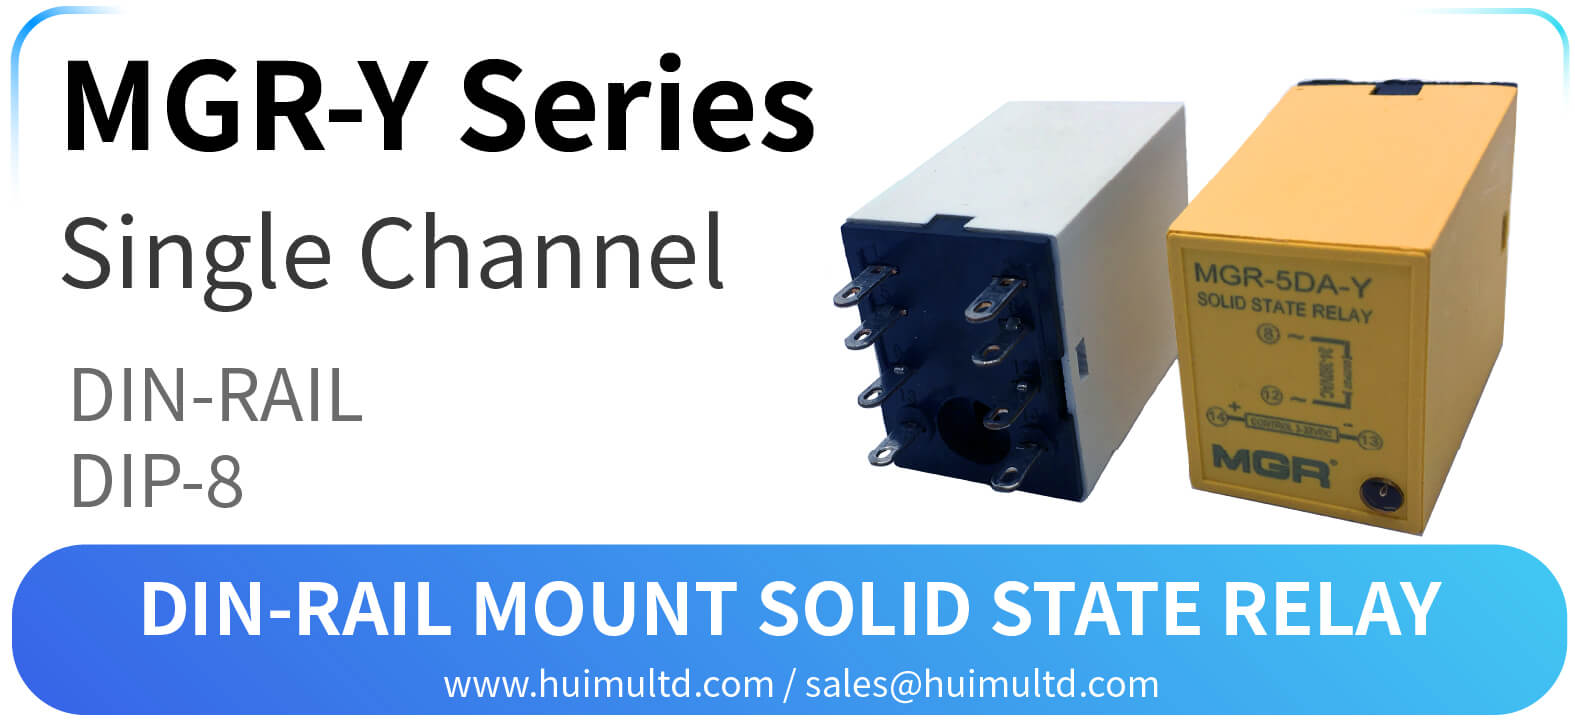 MGR-Y Series DIN-Rail Mount Solid State Relay